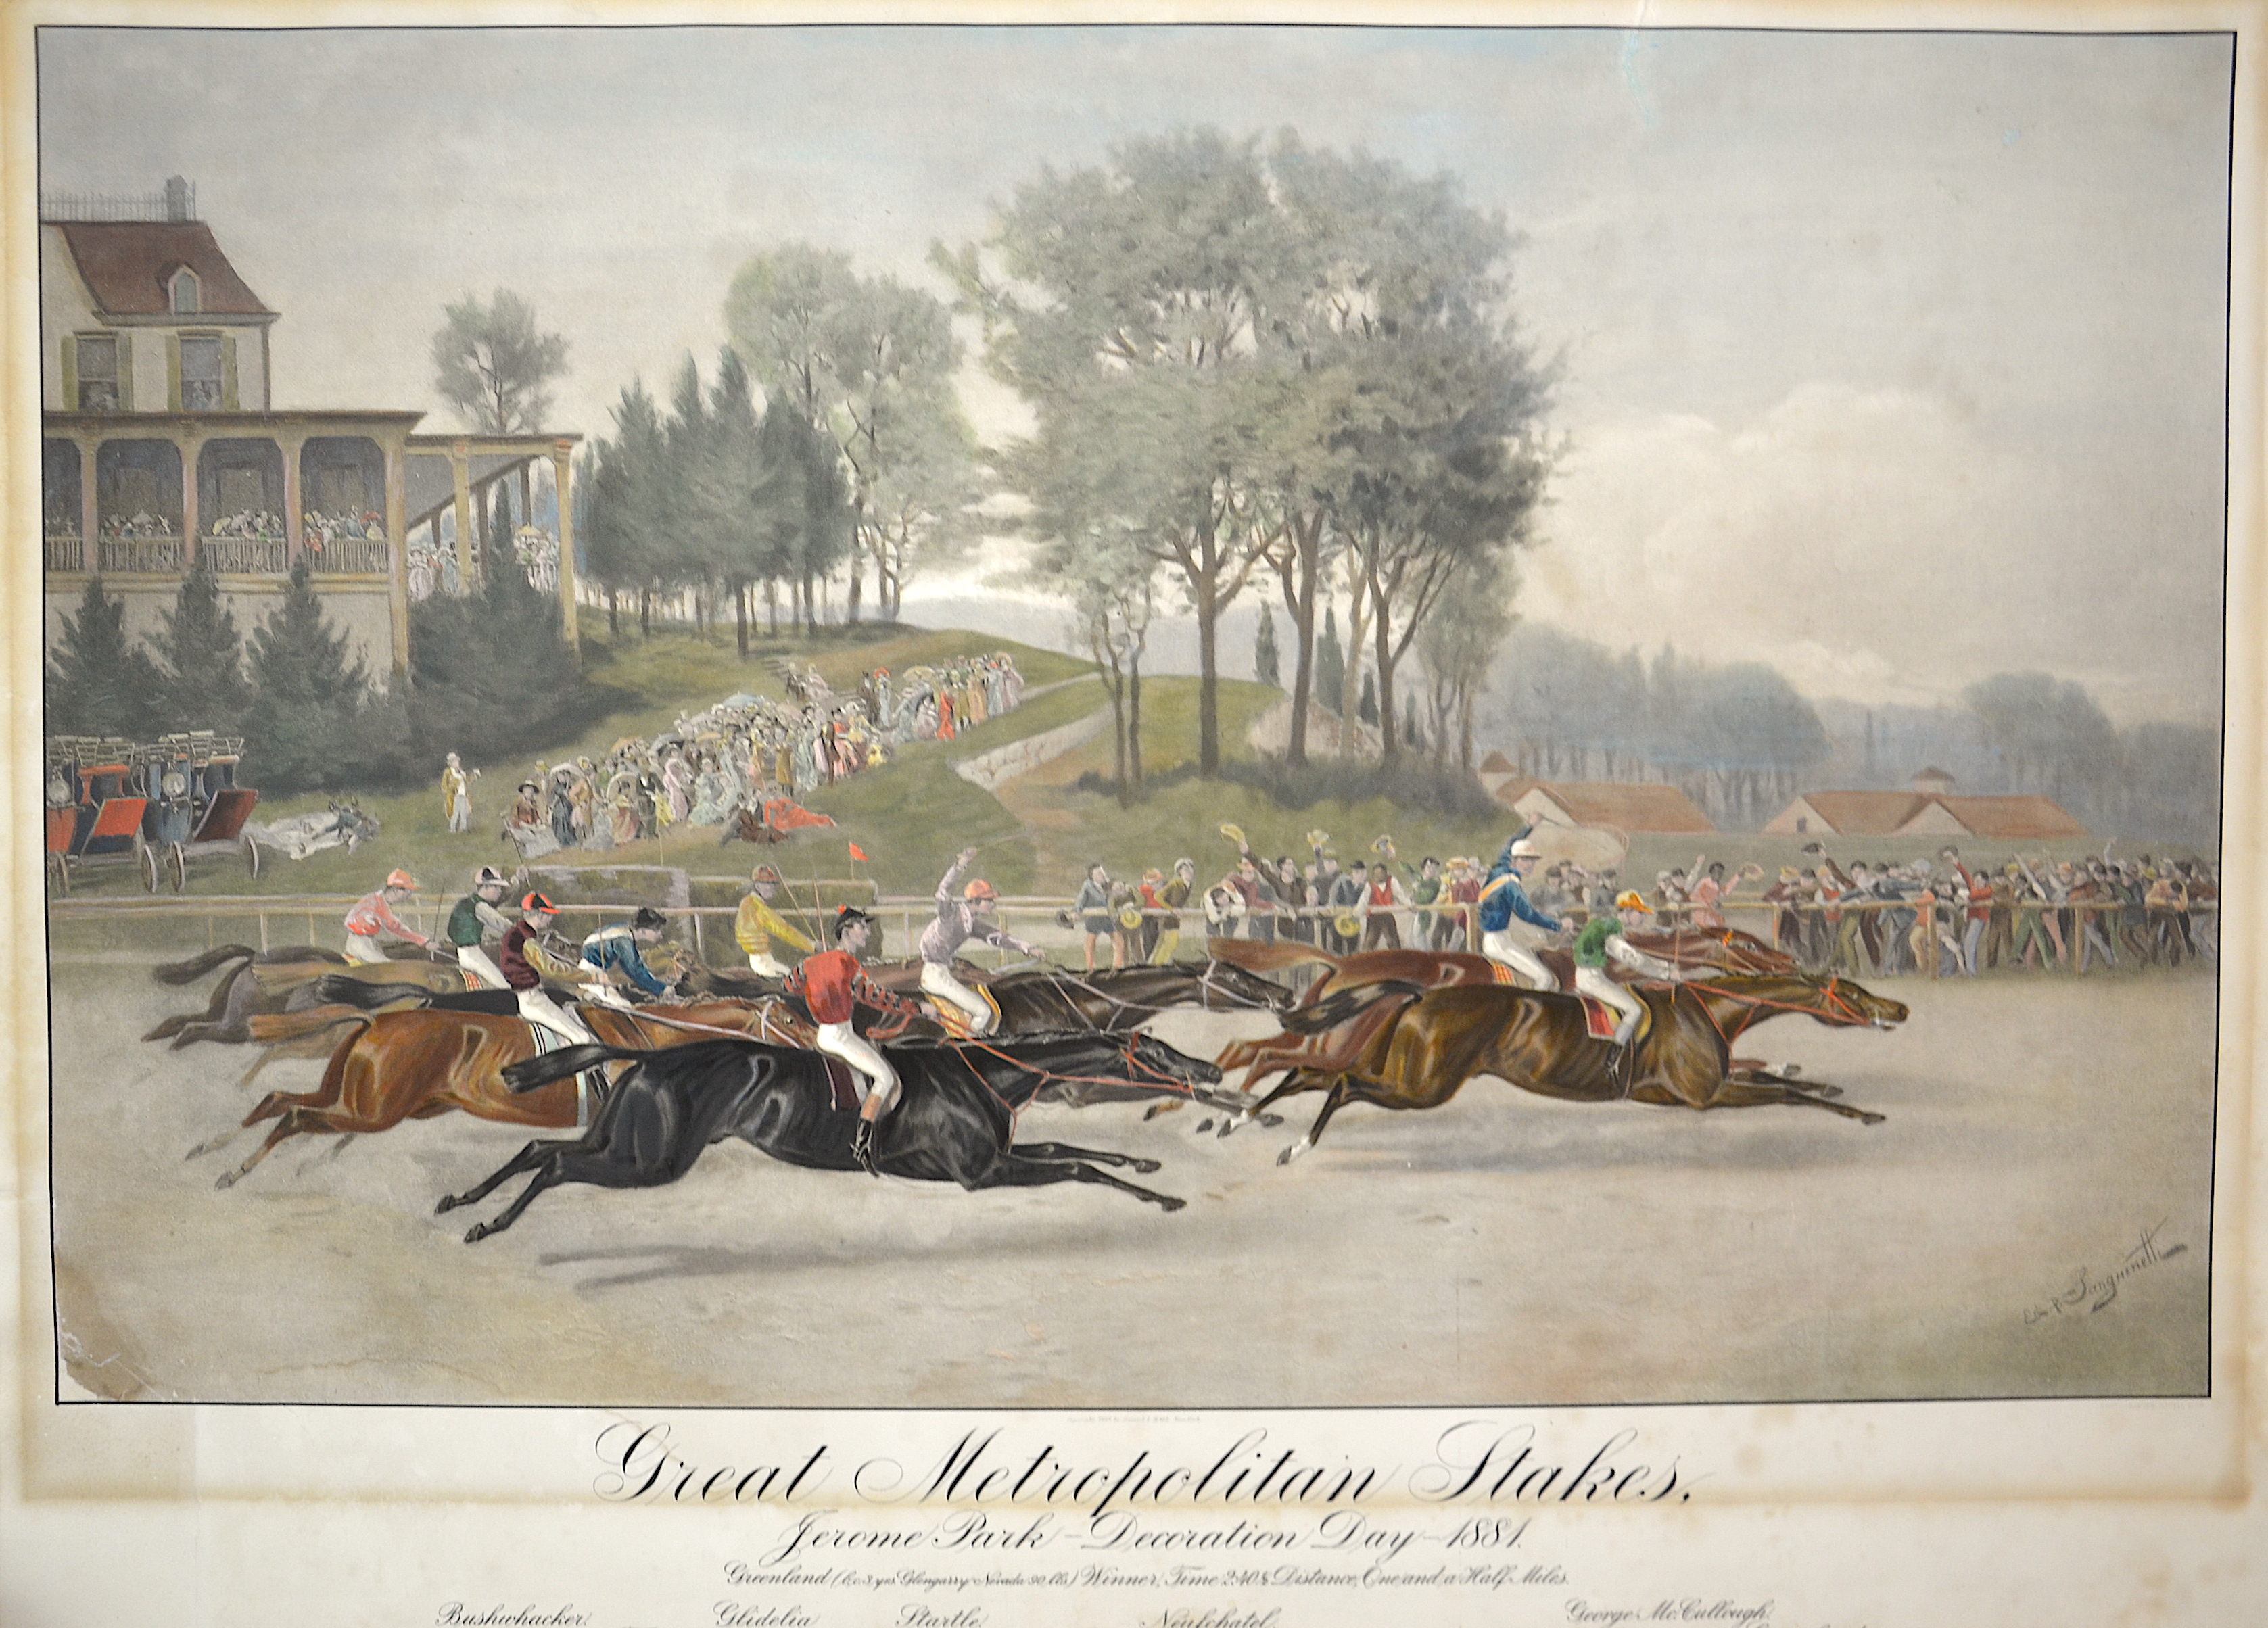 Hall  Great Metropolitan Stakes, Jerome Park-Decoration Day 1881.